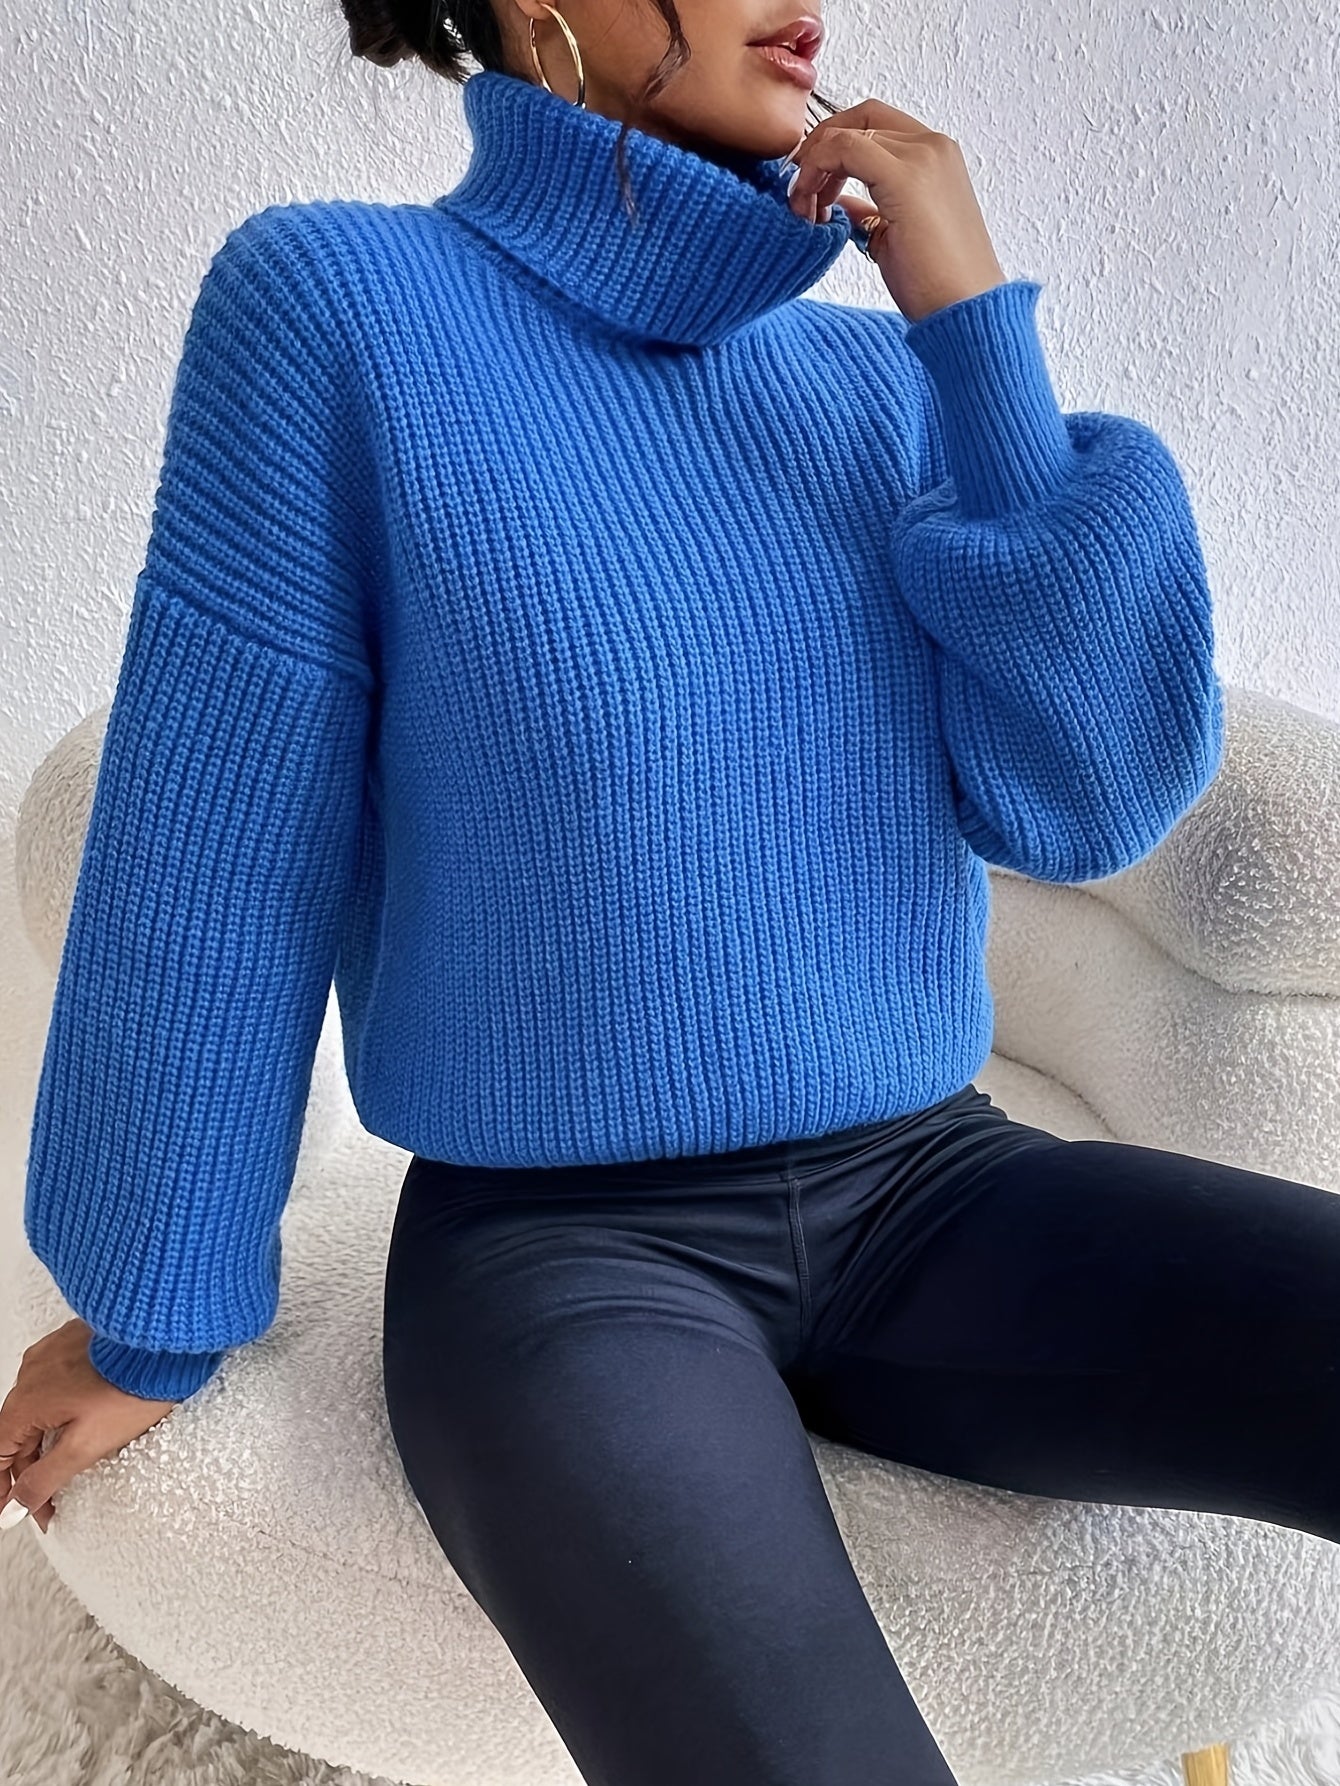 Antmvs Solid Turtle Neck Sweater, Casual Long Sleeve Drop Shoulder Sweater, Women's Clothing